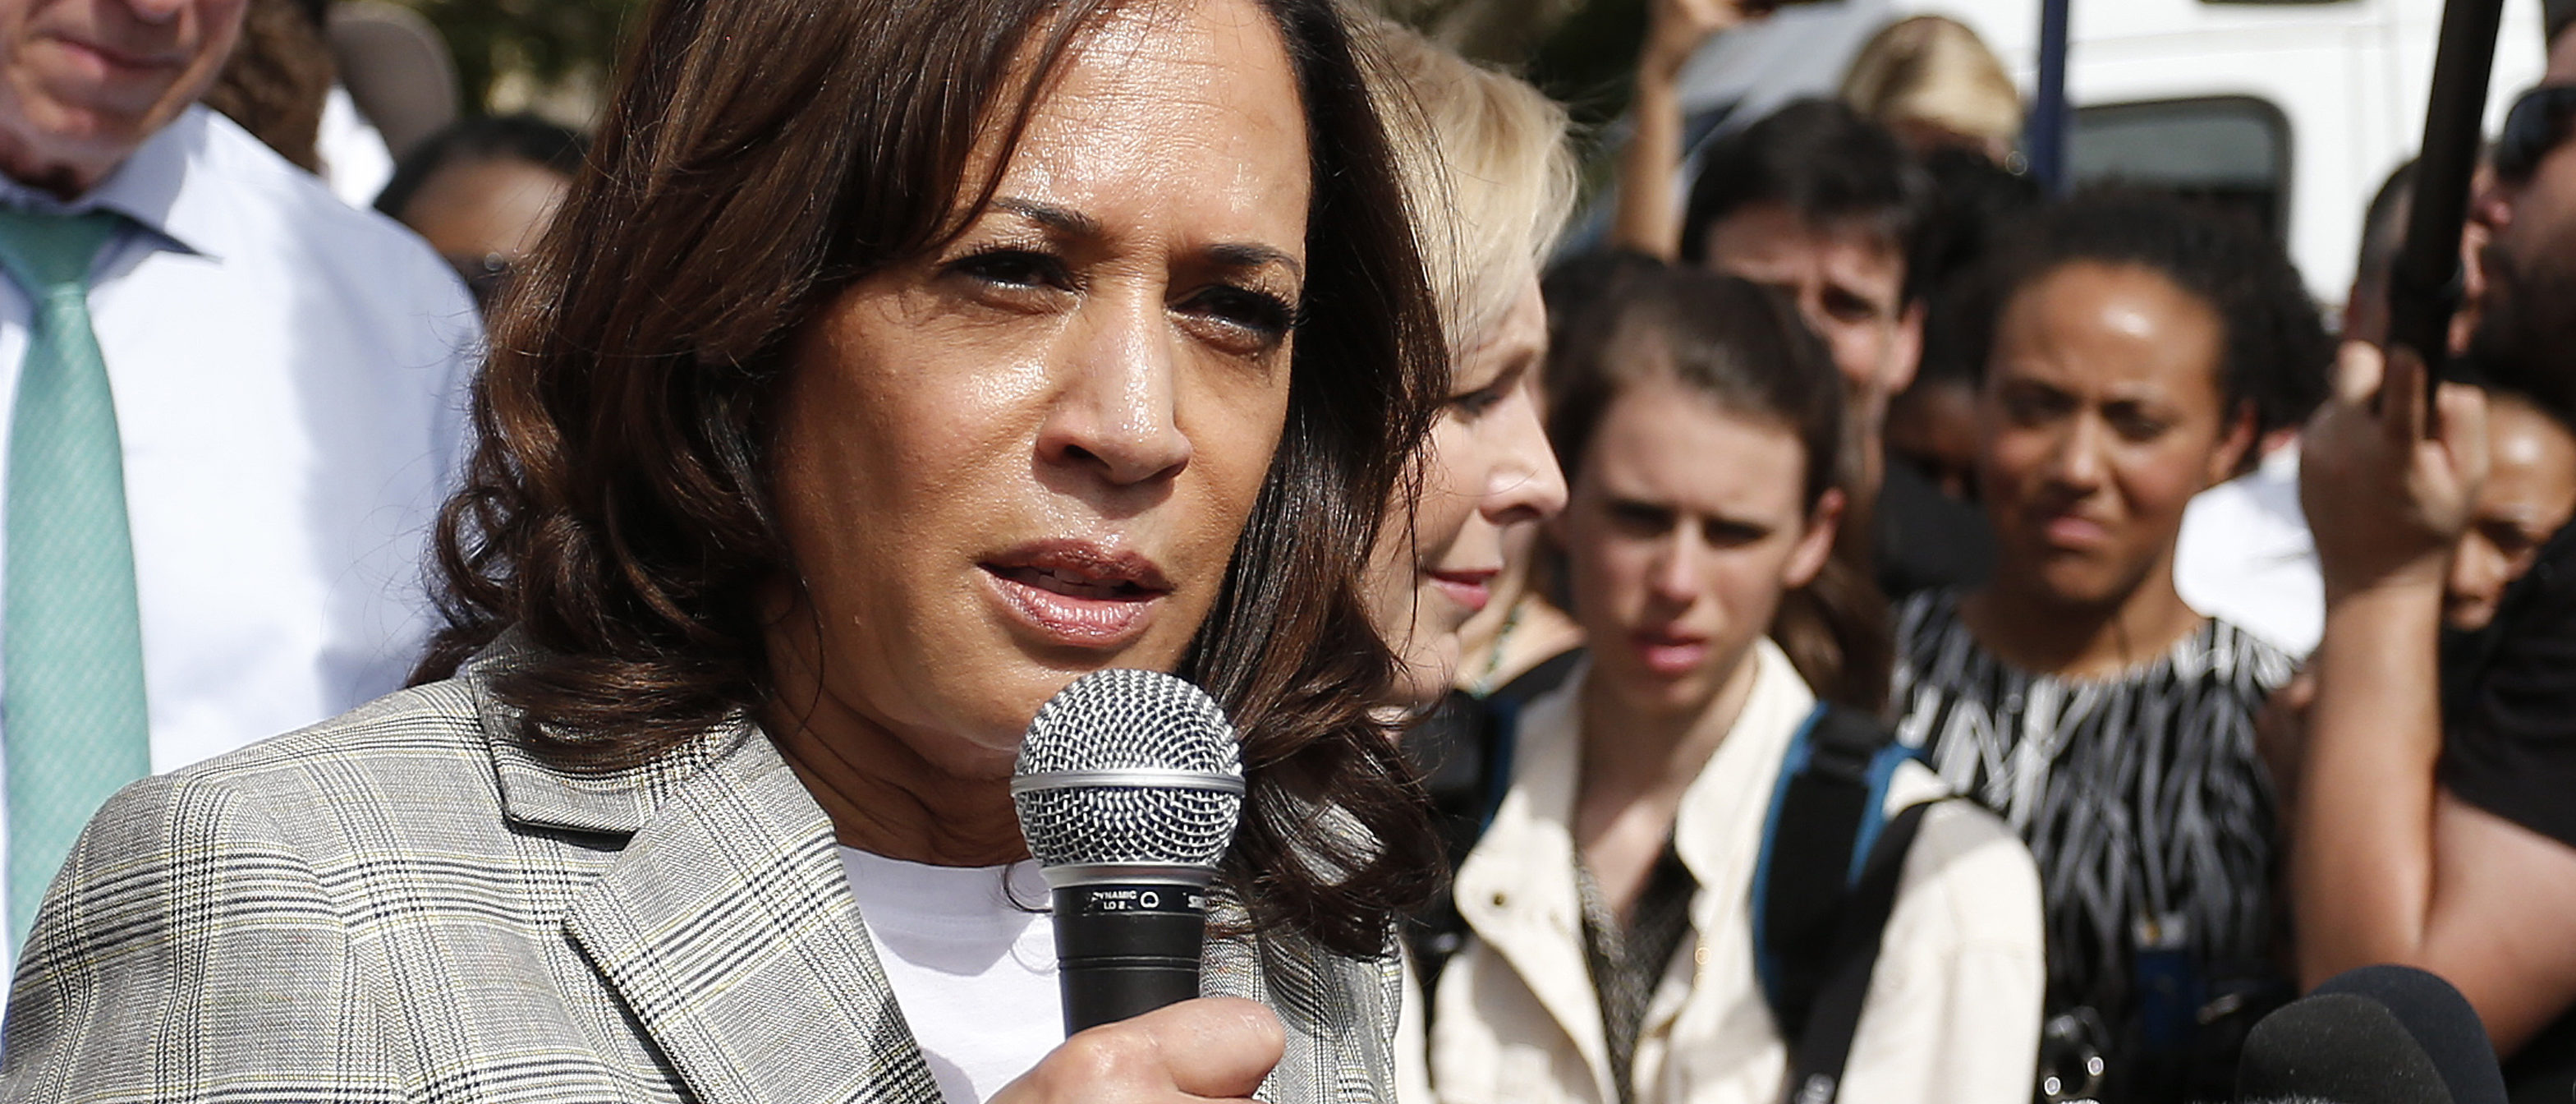 Democratic presidential hopeful Kamala Harris addresses the media about migrant children in front of a detention center in Homestead, Florida on June 28, 2019. (Photo credit should read RHONA WISE/AFP/Getty Images)